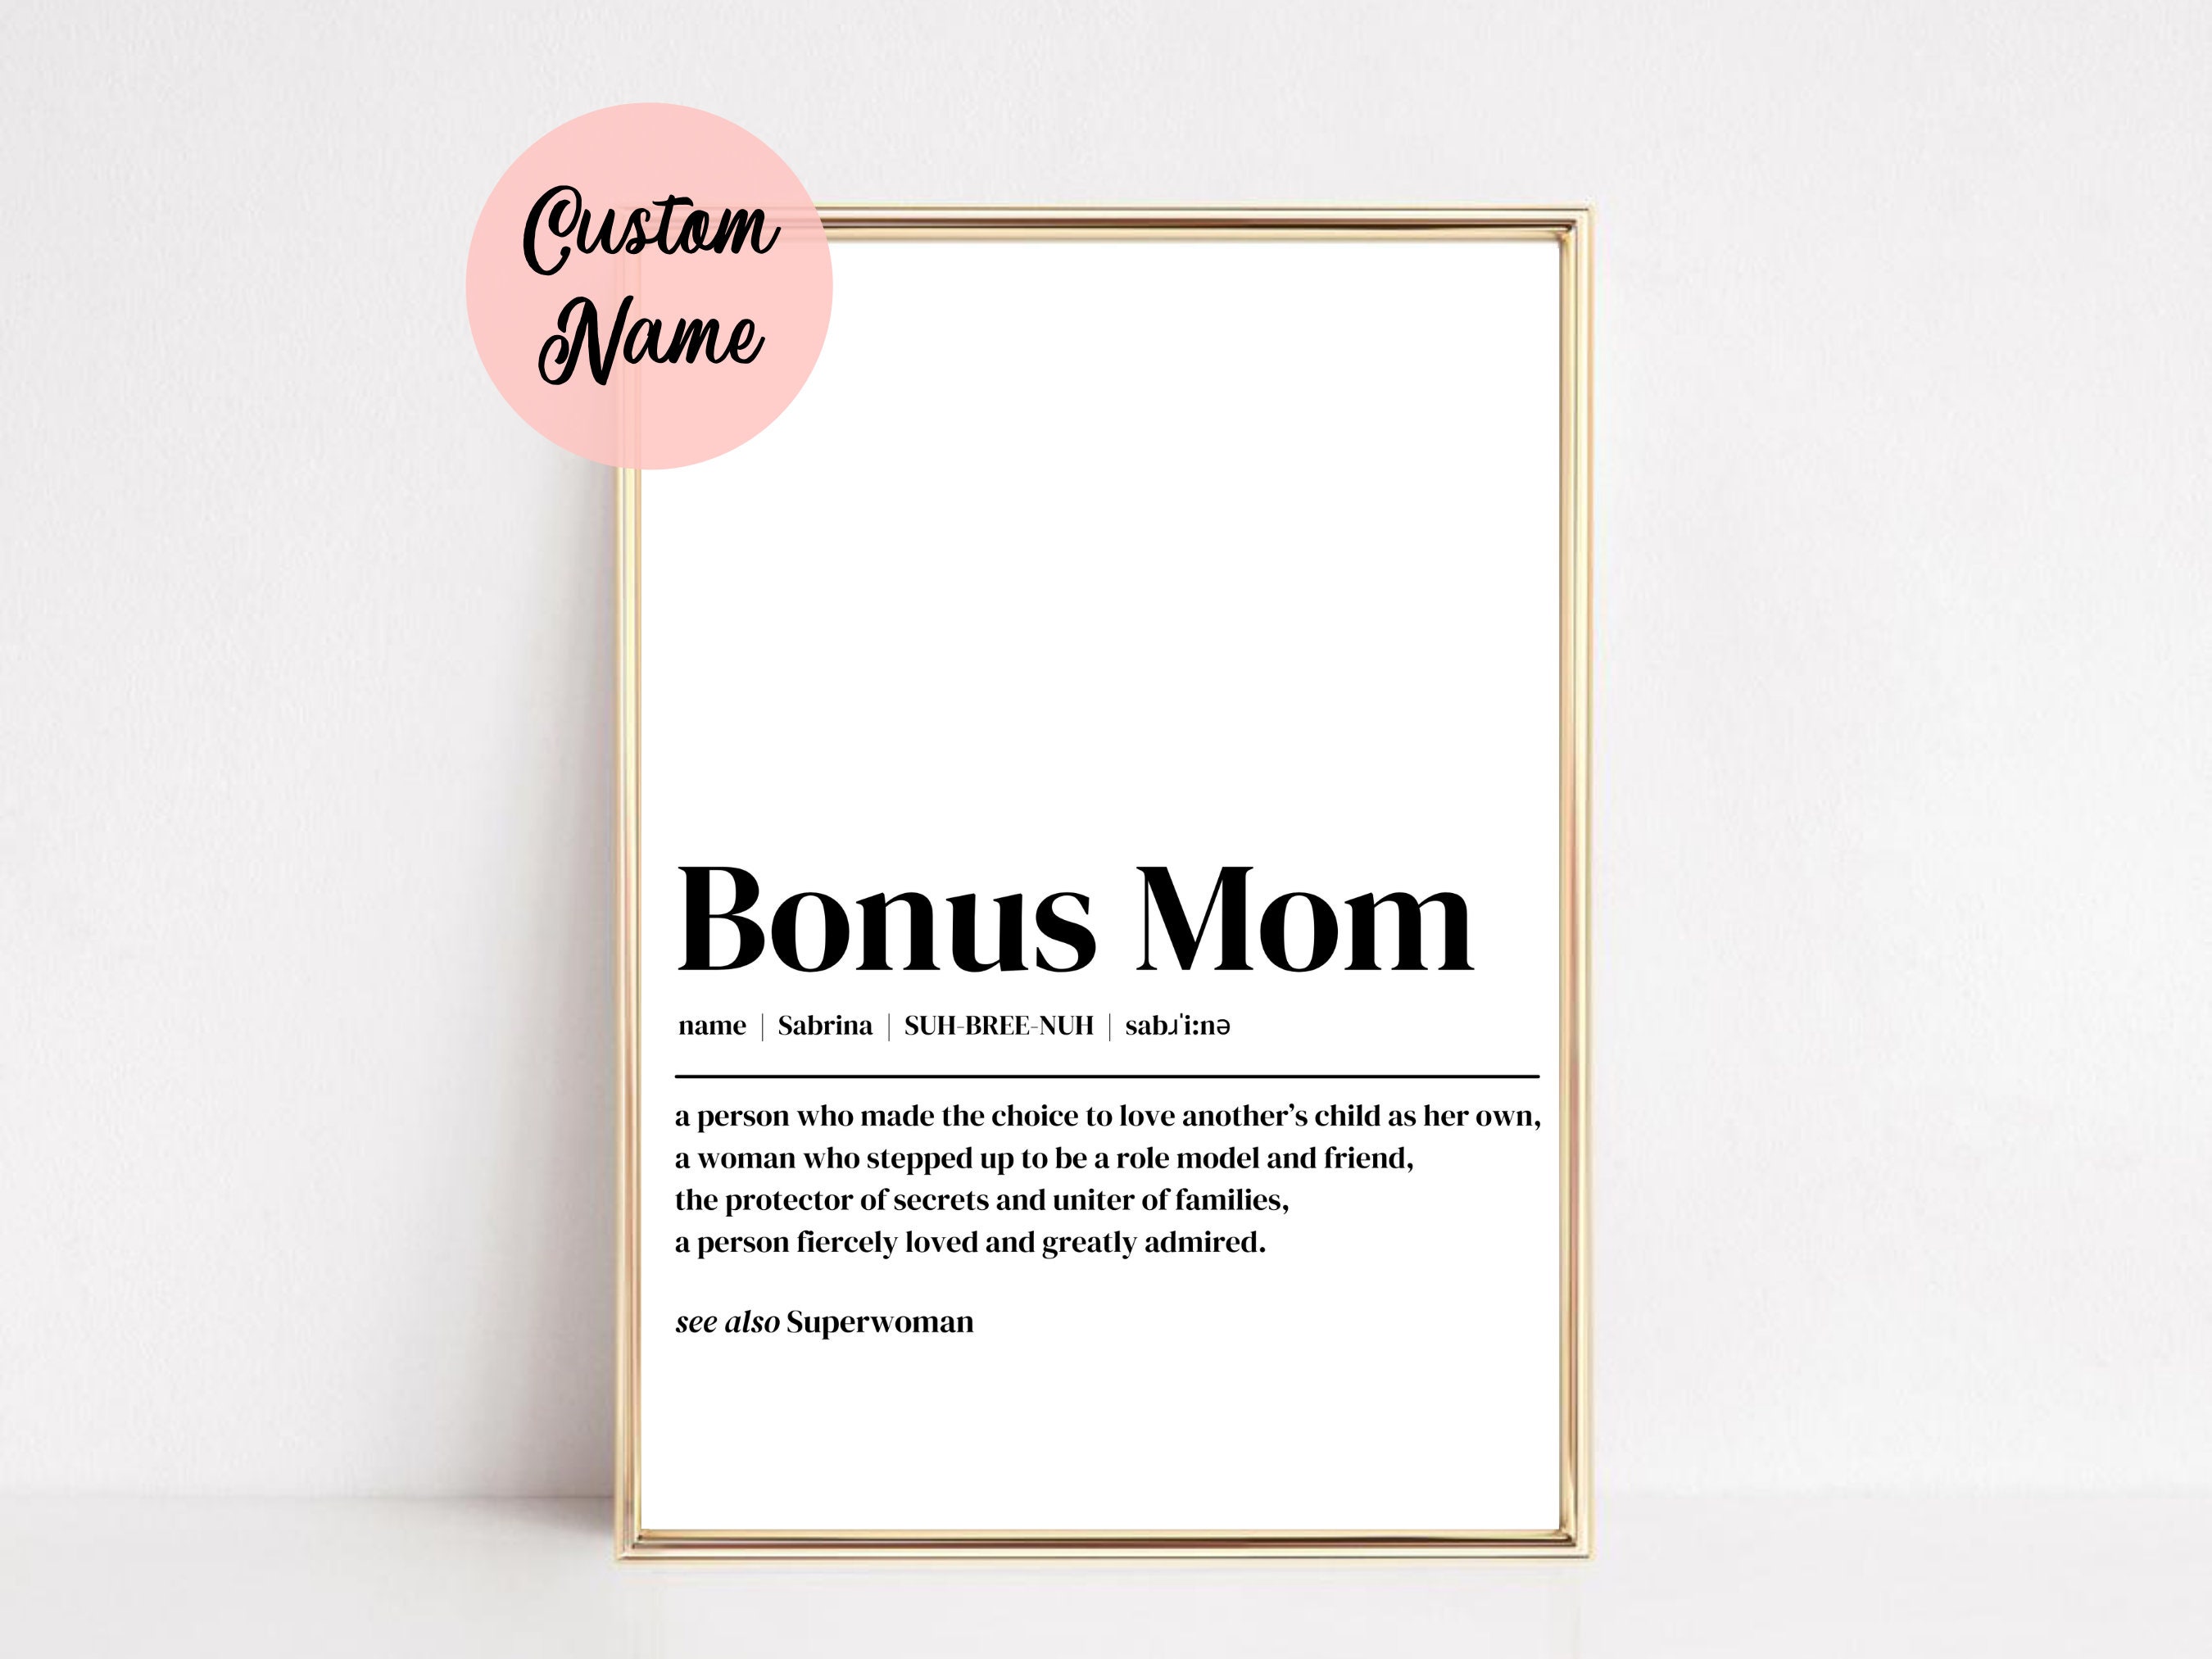  WhatSign Bonus Mom Mother's Day Gifts from Daughter Son To My  Bonus Mom Keepsake and Paperweight Stepmom Mother's Day Gift for Mom Mother  in Law from Stepdaughter Stepson Birthday Gift Present